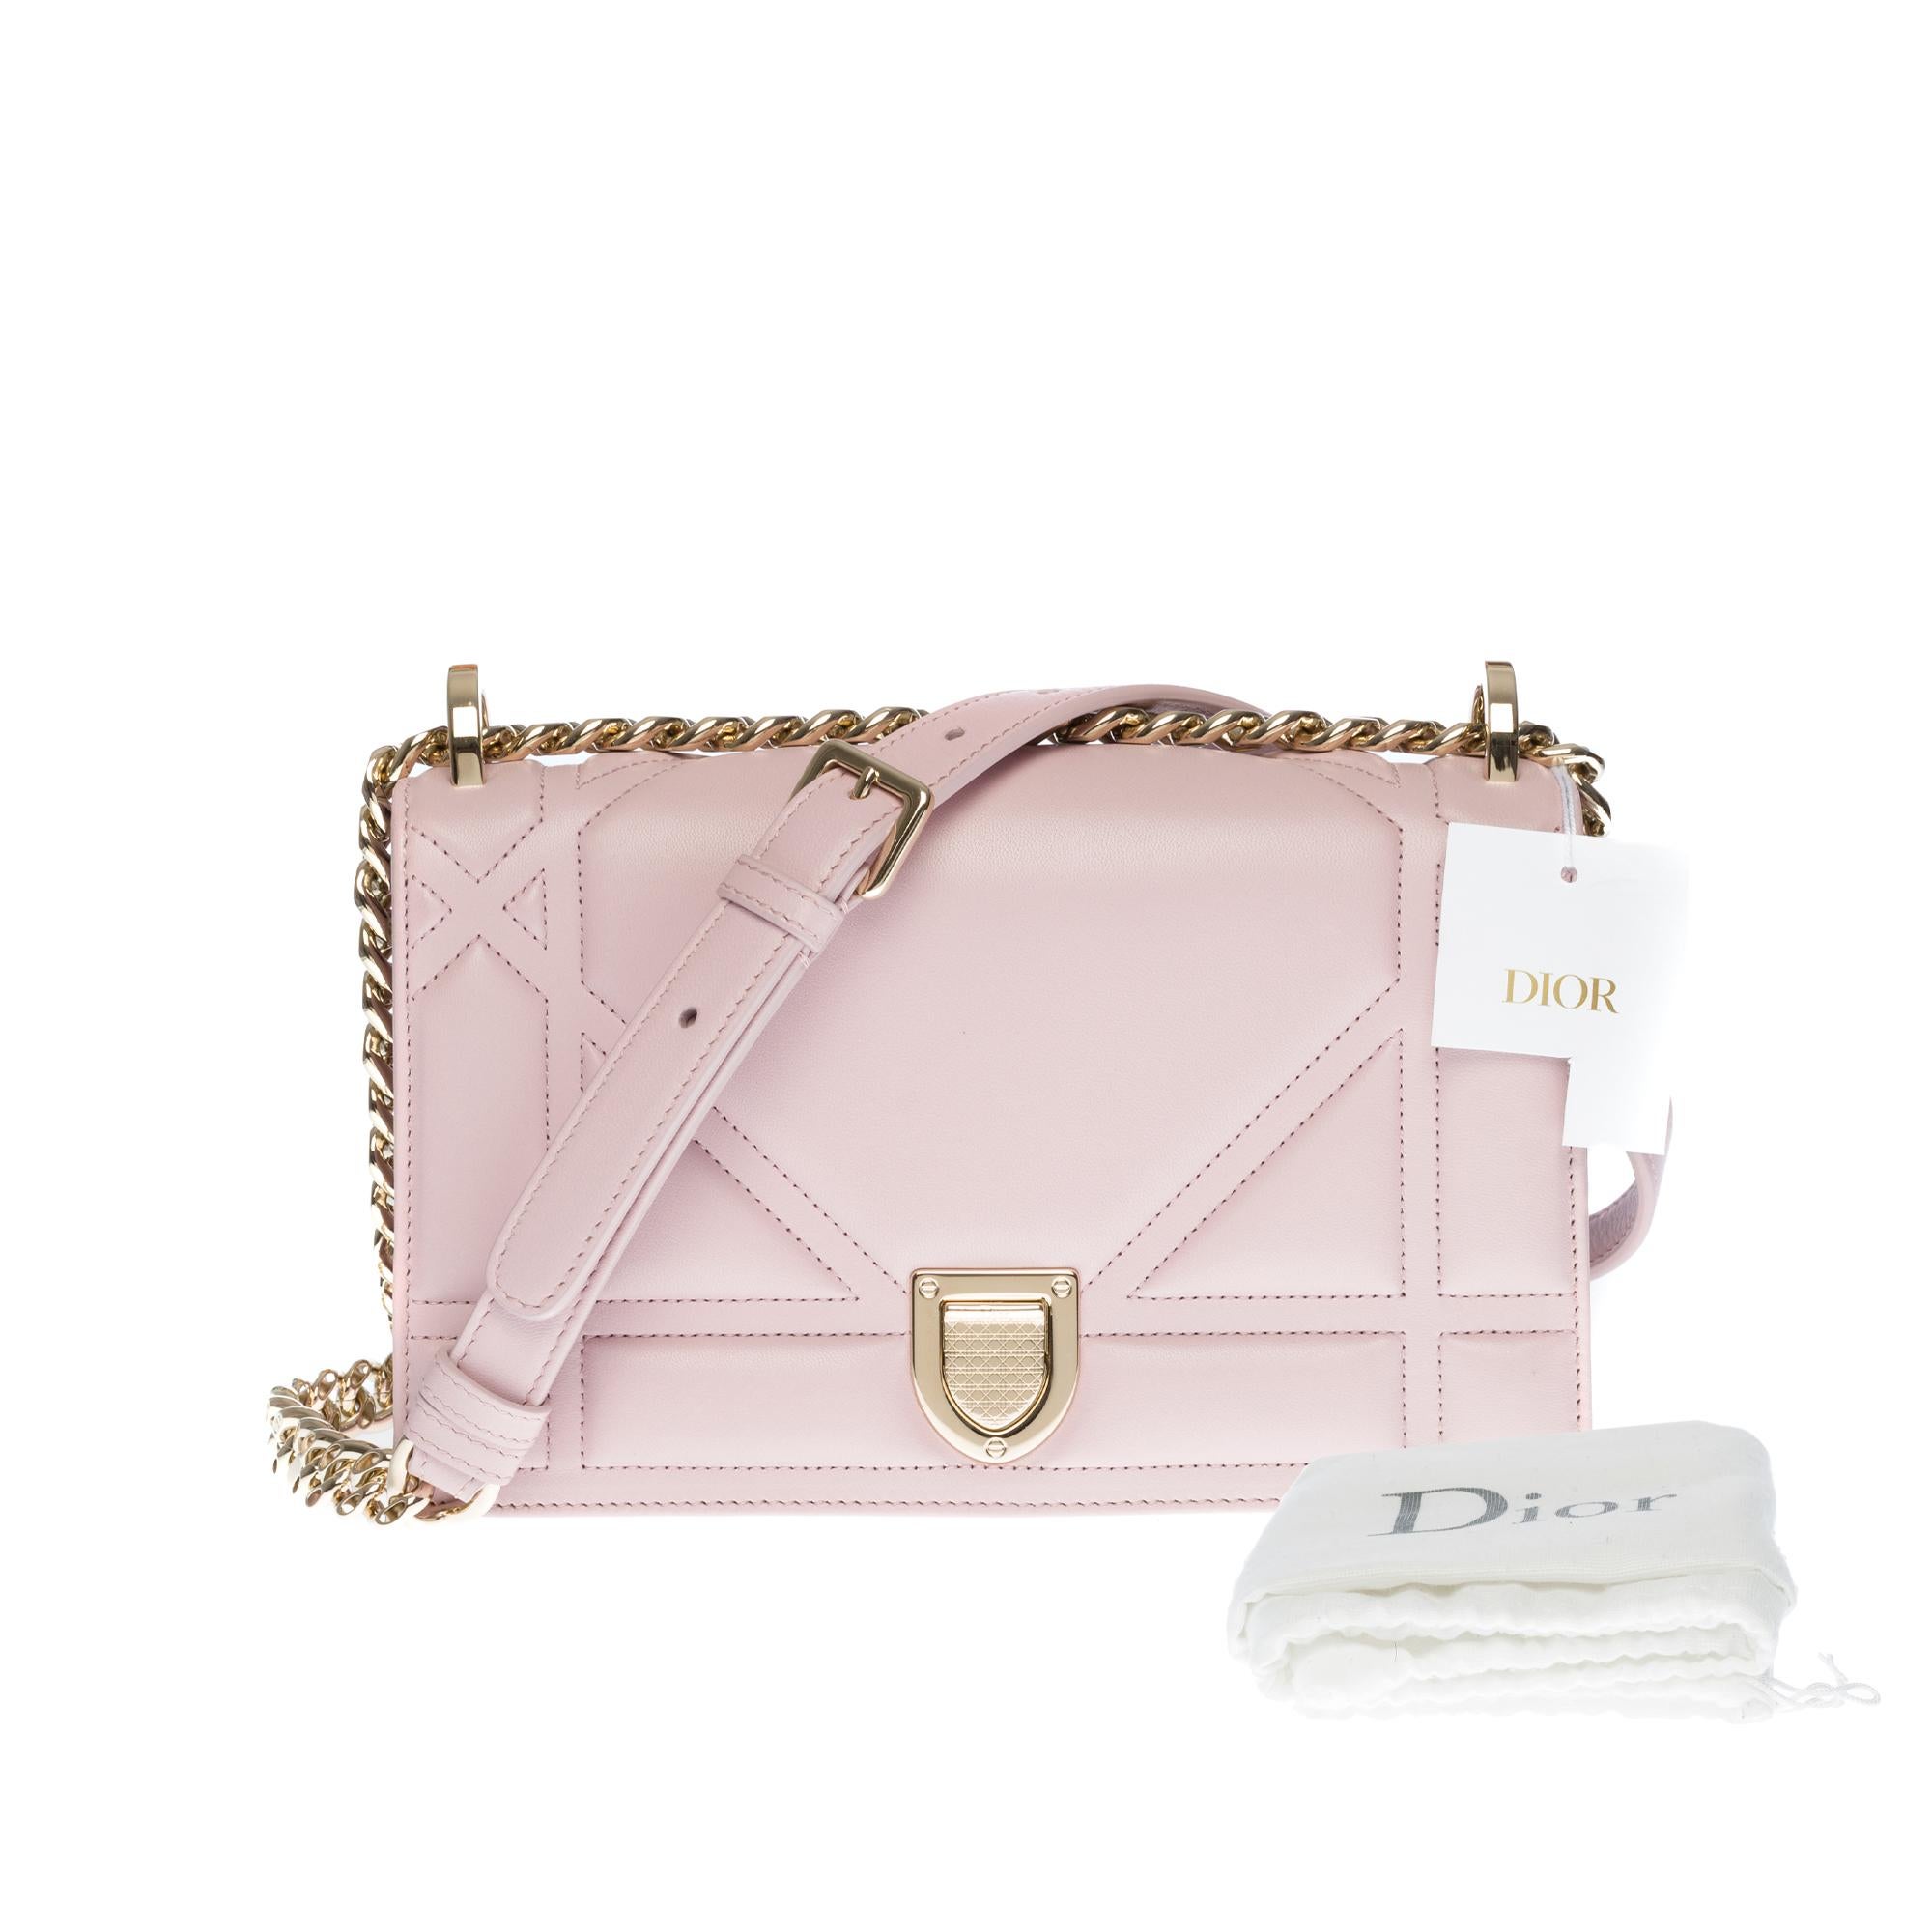 Brand New /Christian Dior Diorama Shoulder bag in Pink cannage leather, SHW 2